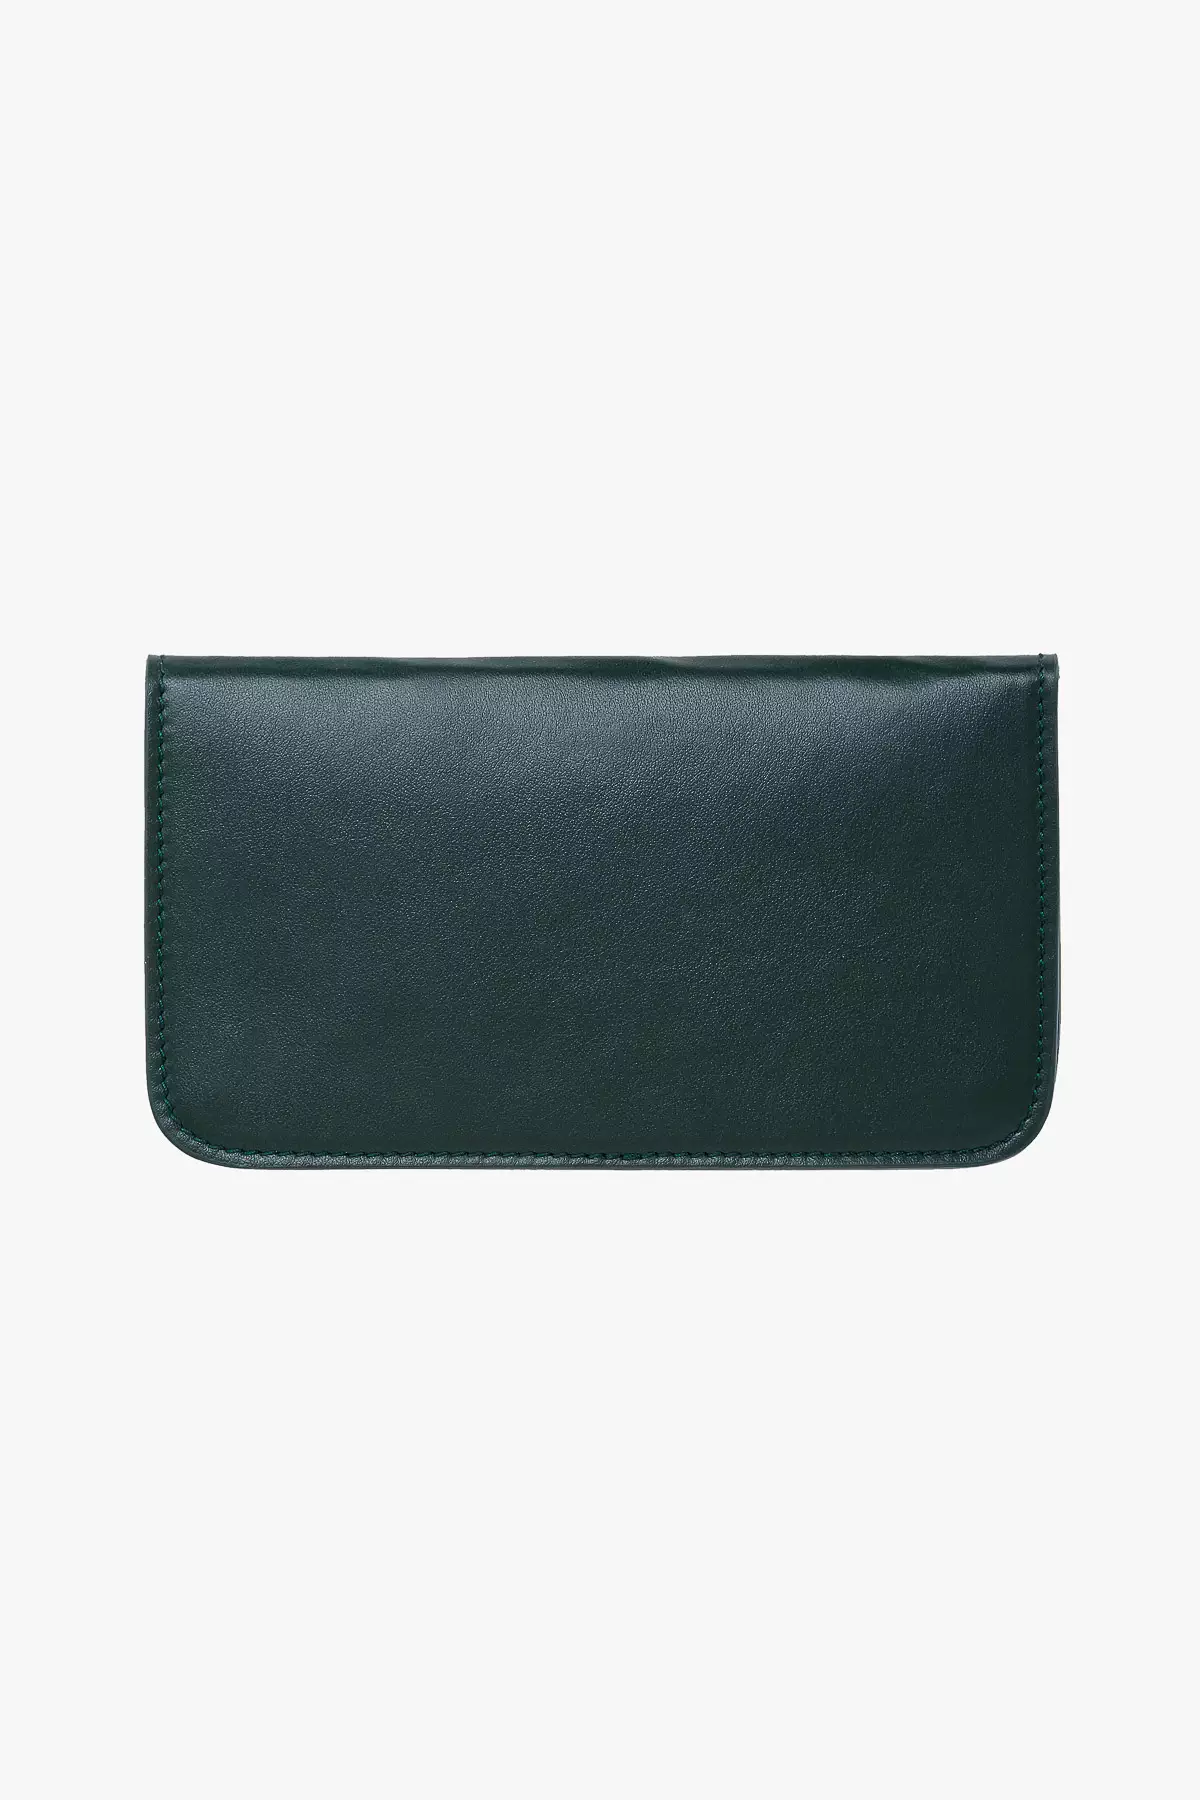 Tobacco Pouch in Leather - Giuliva Heritage